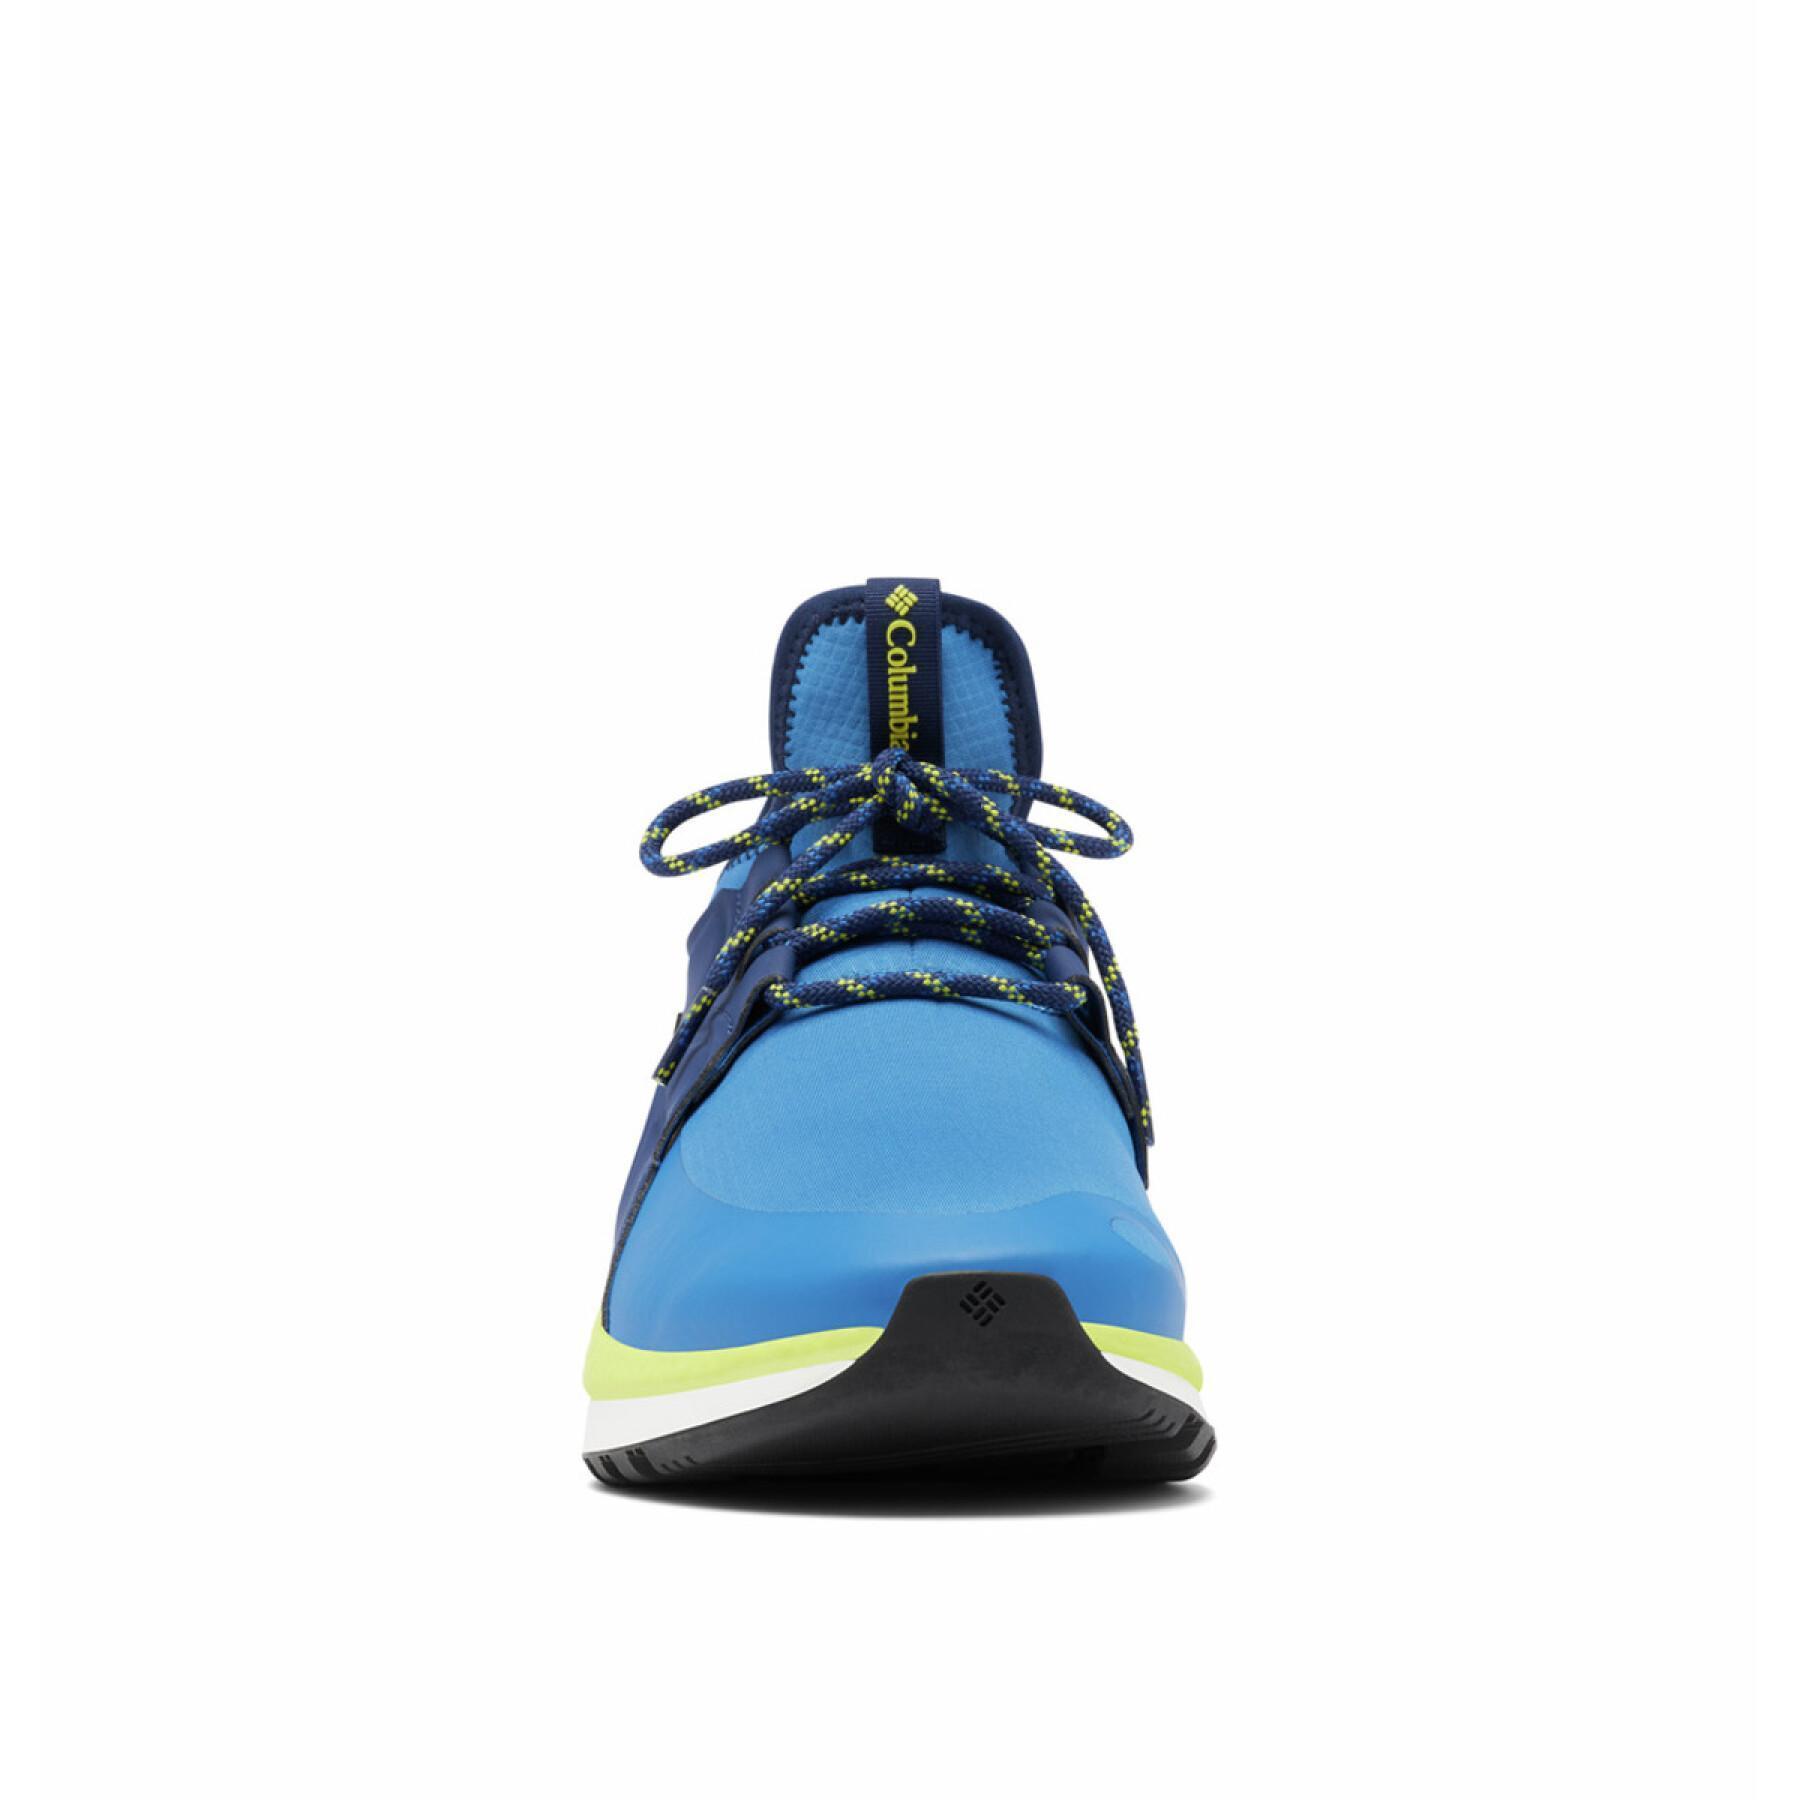 Chaussures Columbia SH/FT AURORA OUTDRY